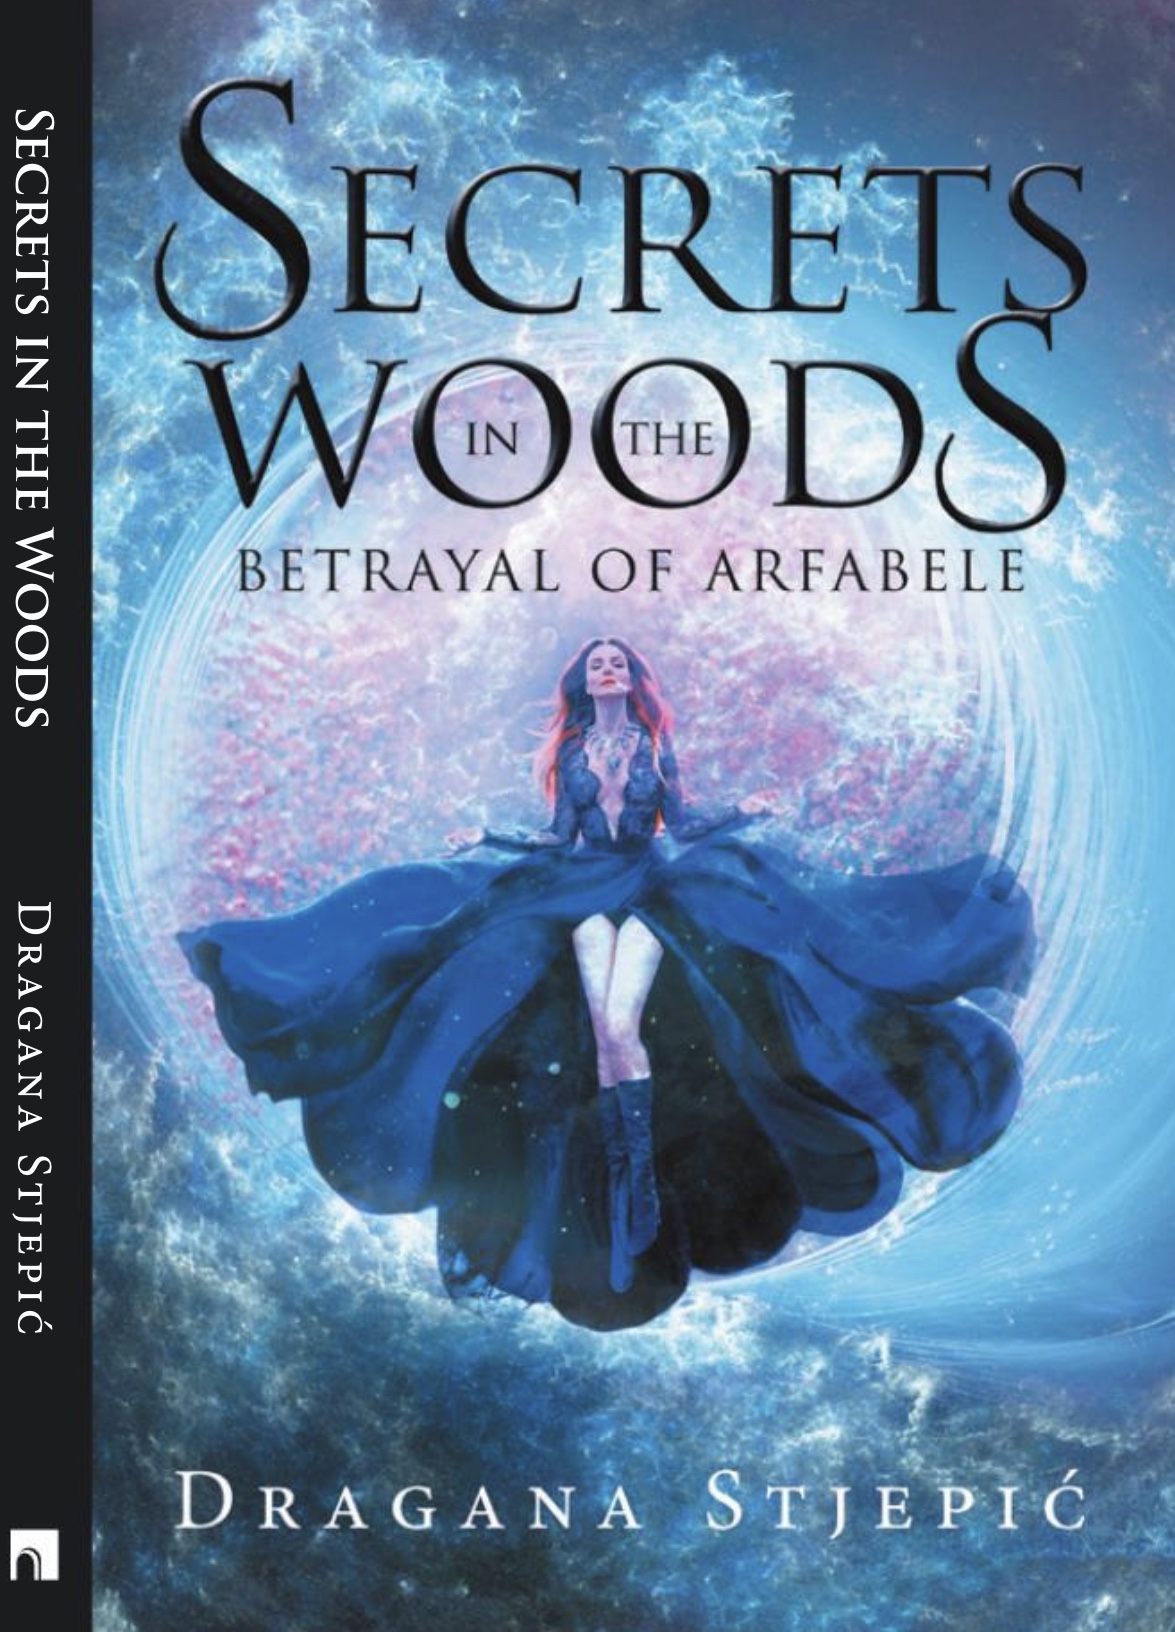 SECRETS IN THE WOODS BETRAYAL OF ARFABELE 